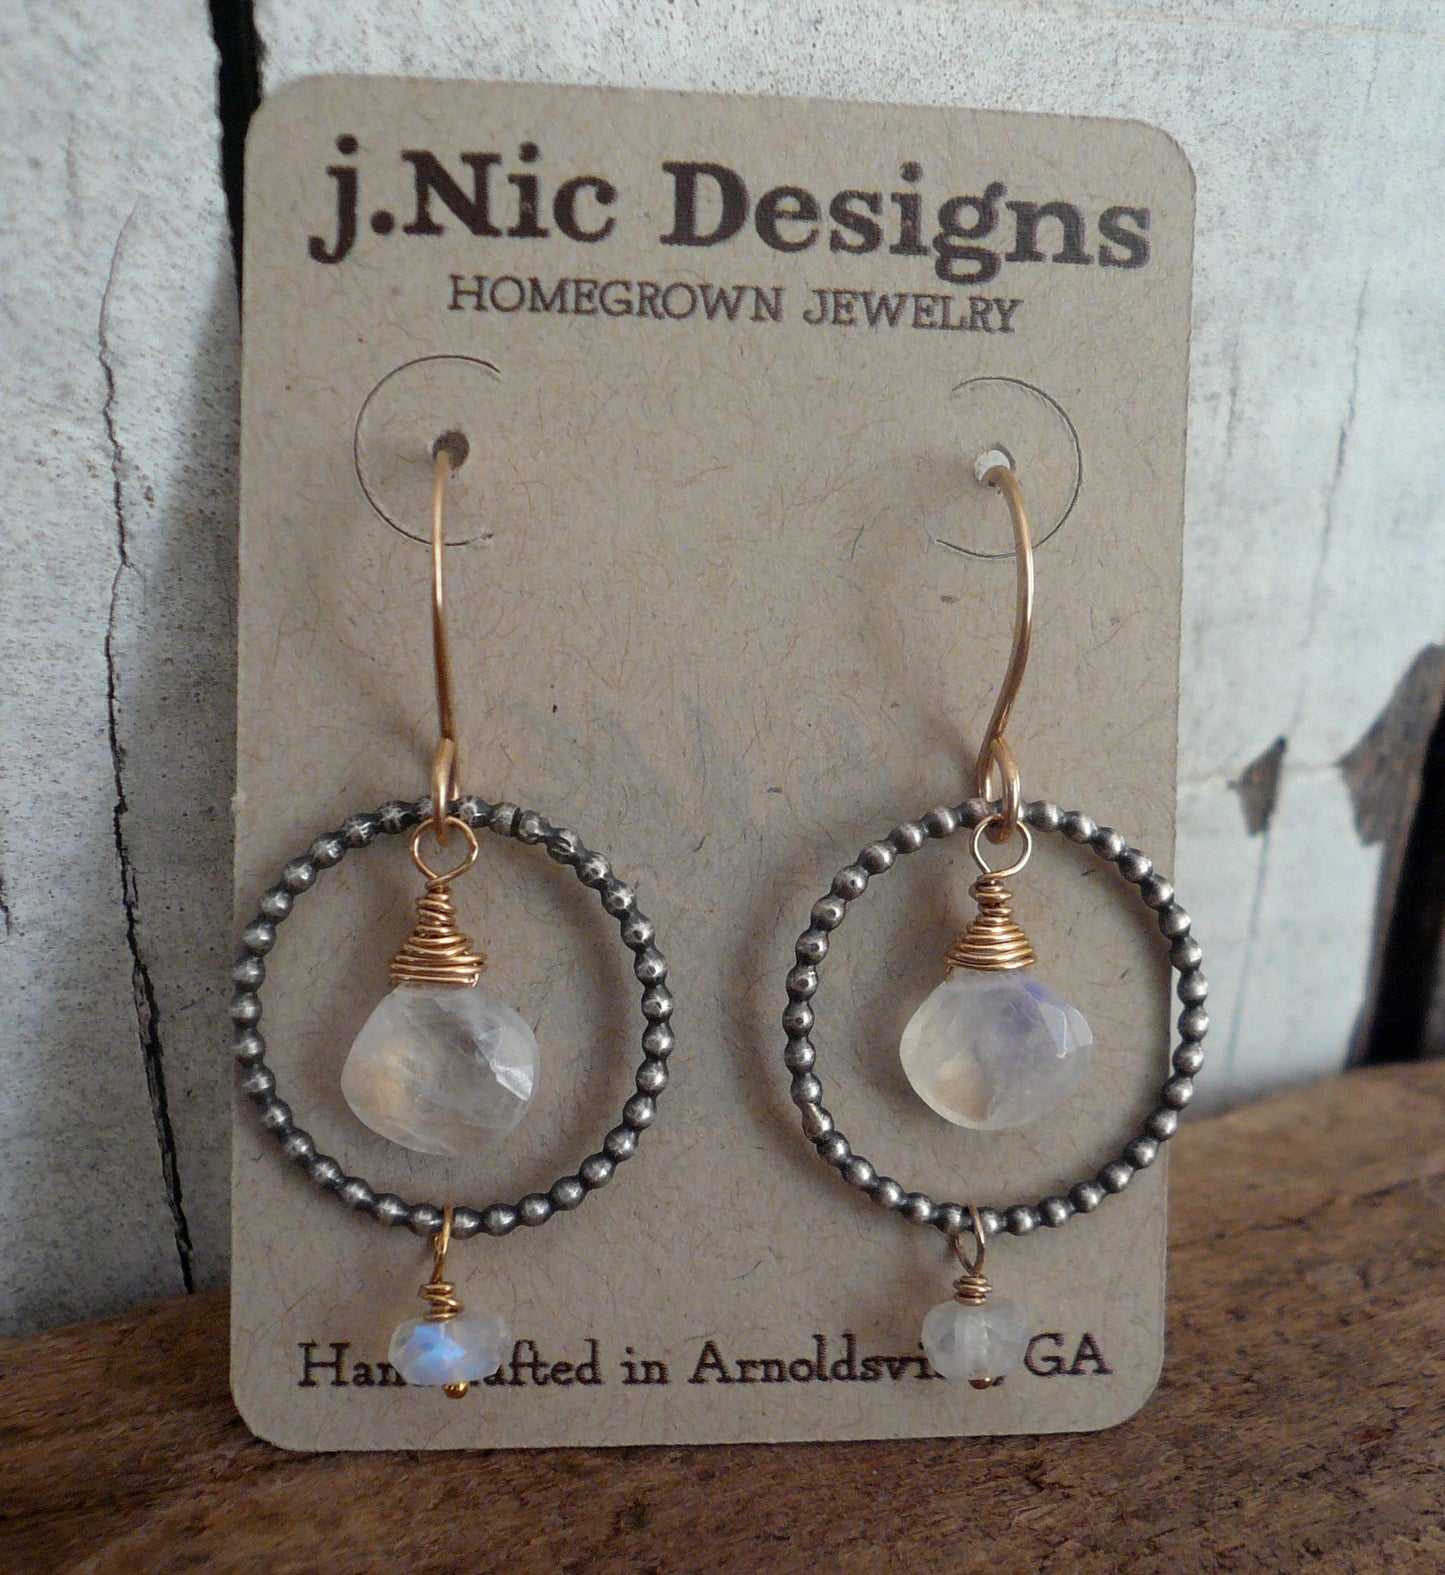 Miscible Collection Earrings - Handmade. Moonstone. Oxidized Sterling silver. 14kt Goldfill. Mixed Metal Earrings